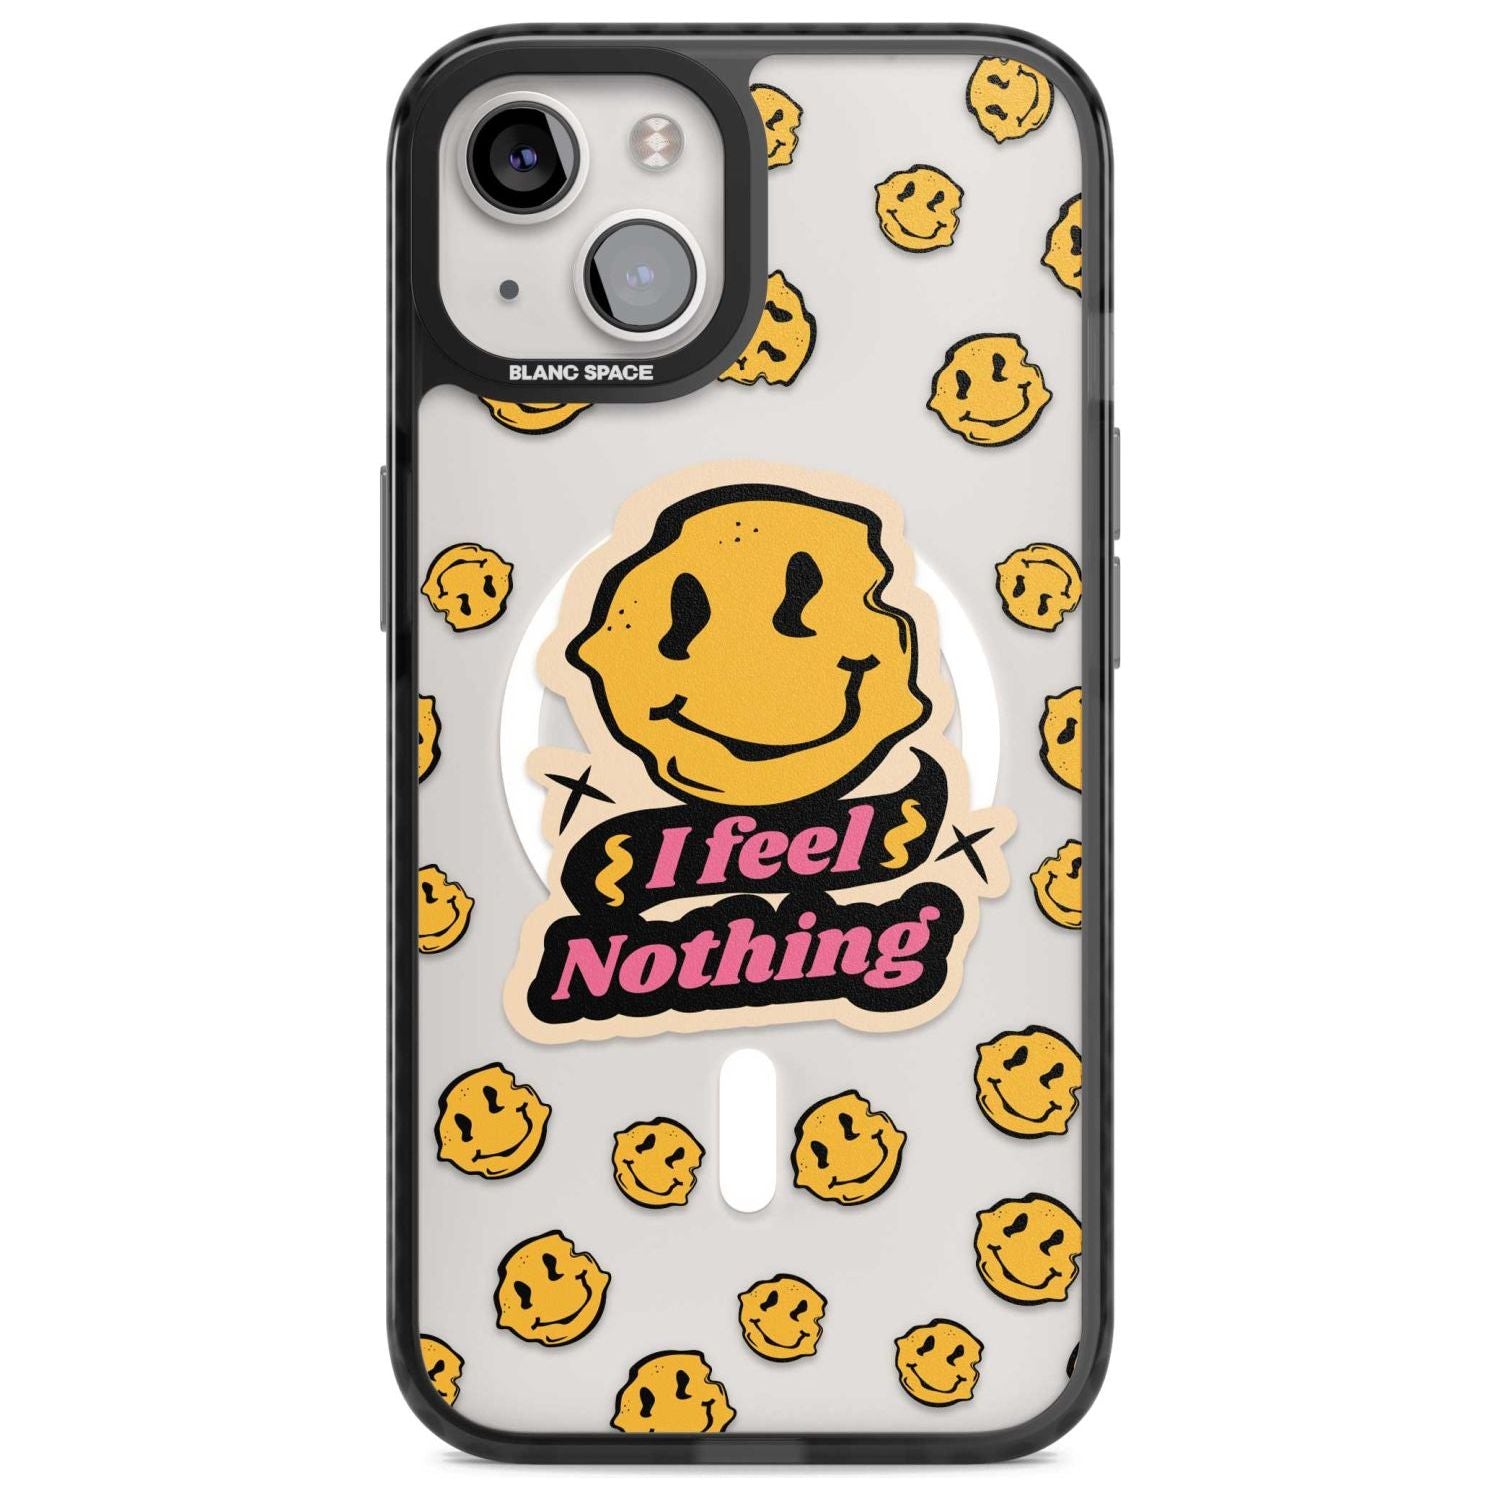 I feel nothing (Clear) Phone Case iPhone 15 Plus / Magsafe Black Impact Case,iPhone 15 / Magsafe Black Impact Case,iPhone 14 Plus / Magsafe Black Impact Case,iPhone 14 / Magsafe Black Impact Case,iPhone 13 / Magsafe Black Impact Case Blanc Space